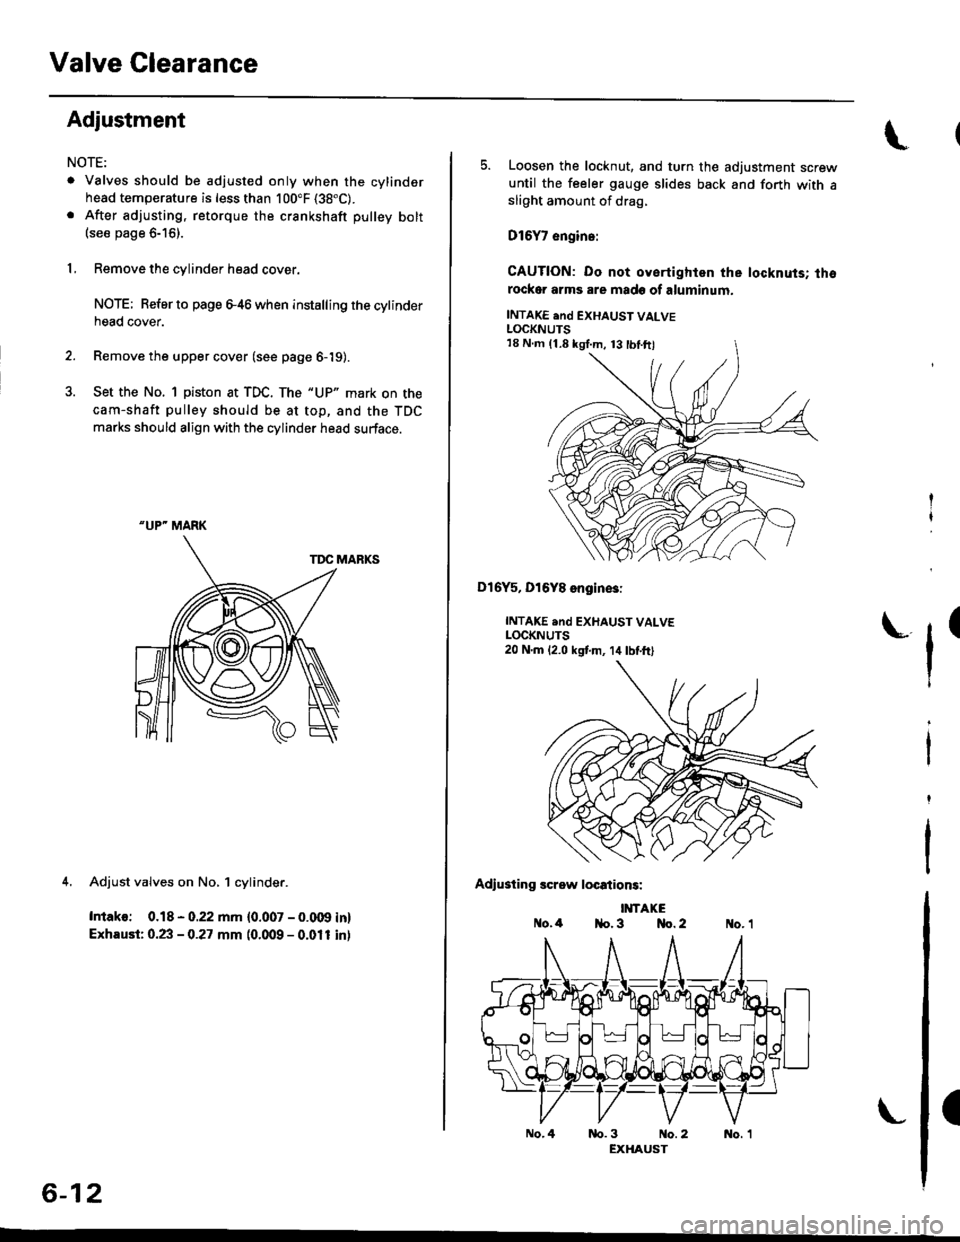 HONDA CIVIC 1996 6.G Workshop Manual Valve Clearance
Adjustment
NOTE:
. Valves should be adjusted only when the cylindsrhead temperature is less than 100"F (38"C).
. After adjusting, retorque the crankshaft pulley bolt(see page 6-16).
1,